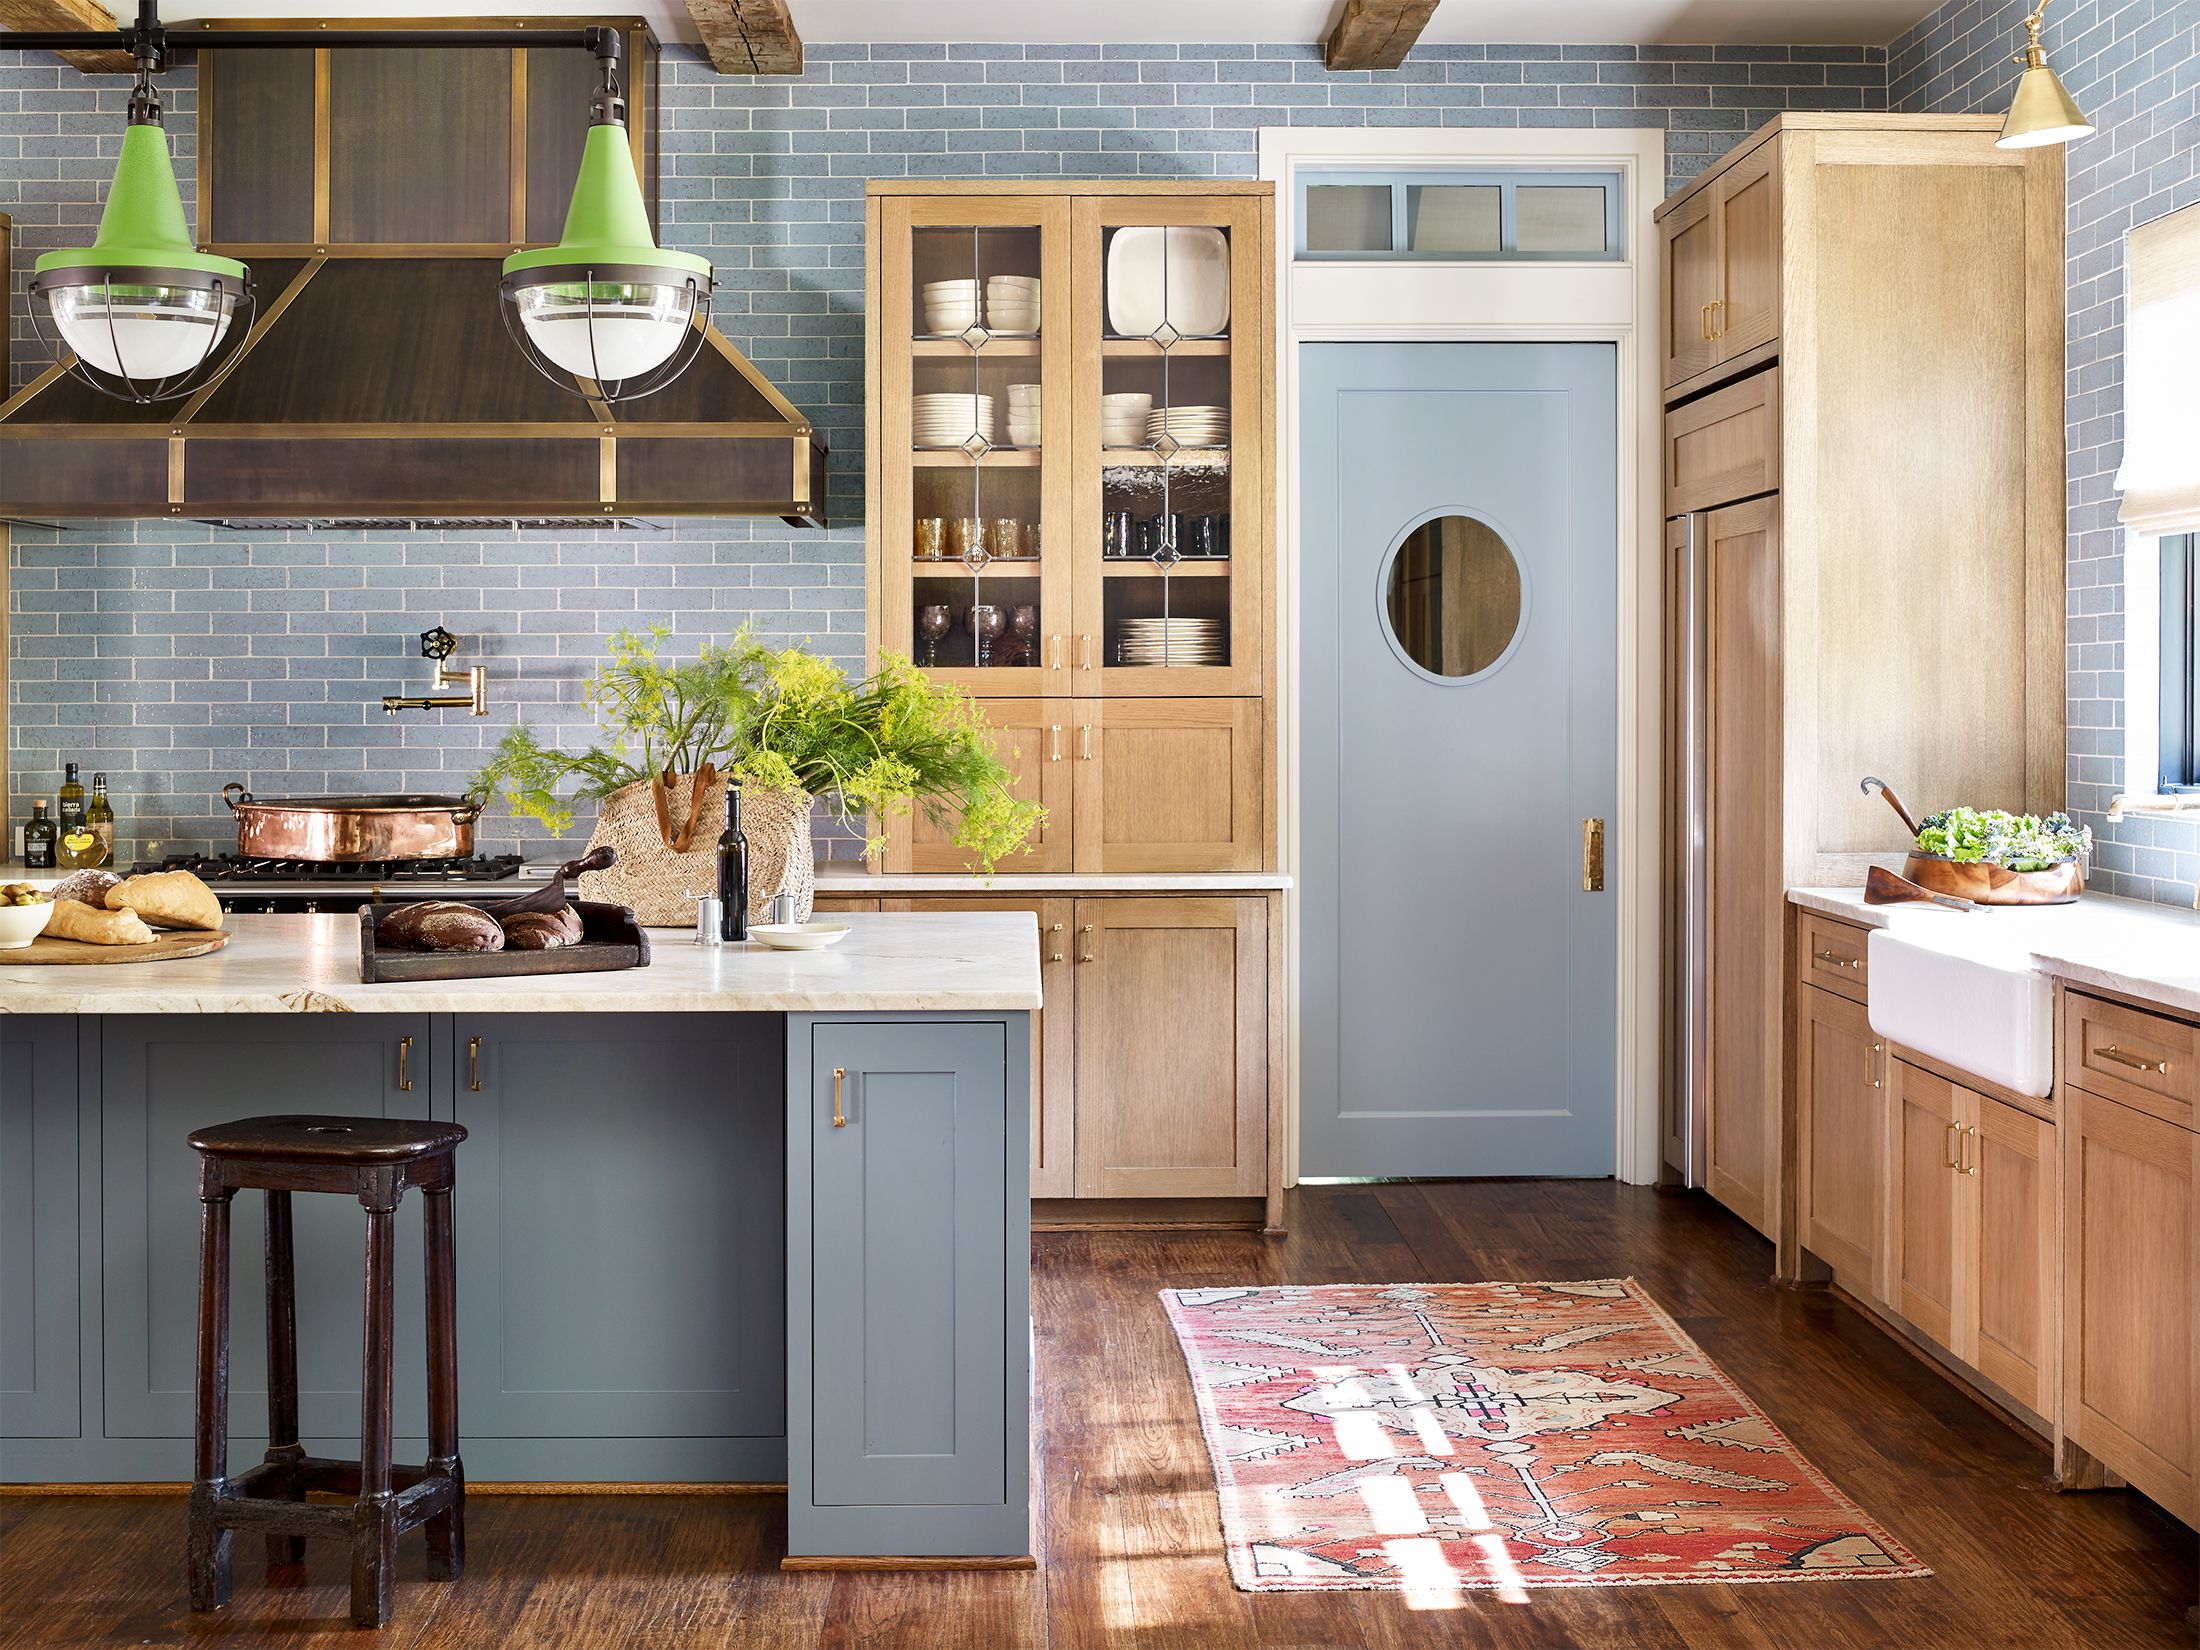 How to Pick the Perfect Teal Backsplash for Your Kitchen: 7 Gorgeous Design Ideas You